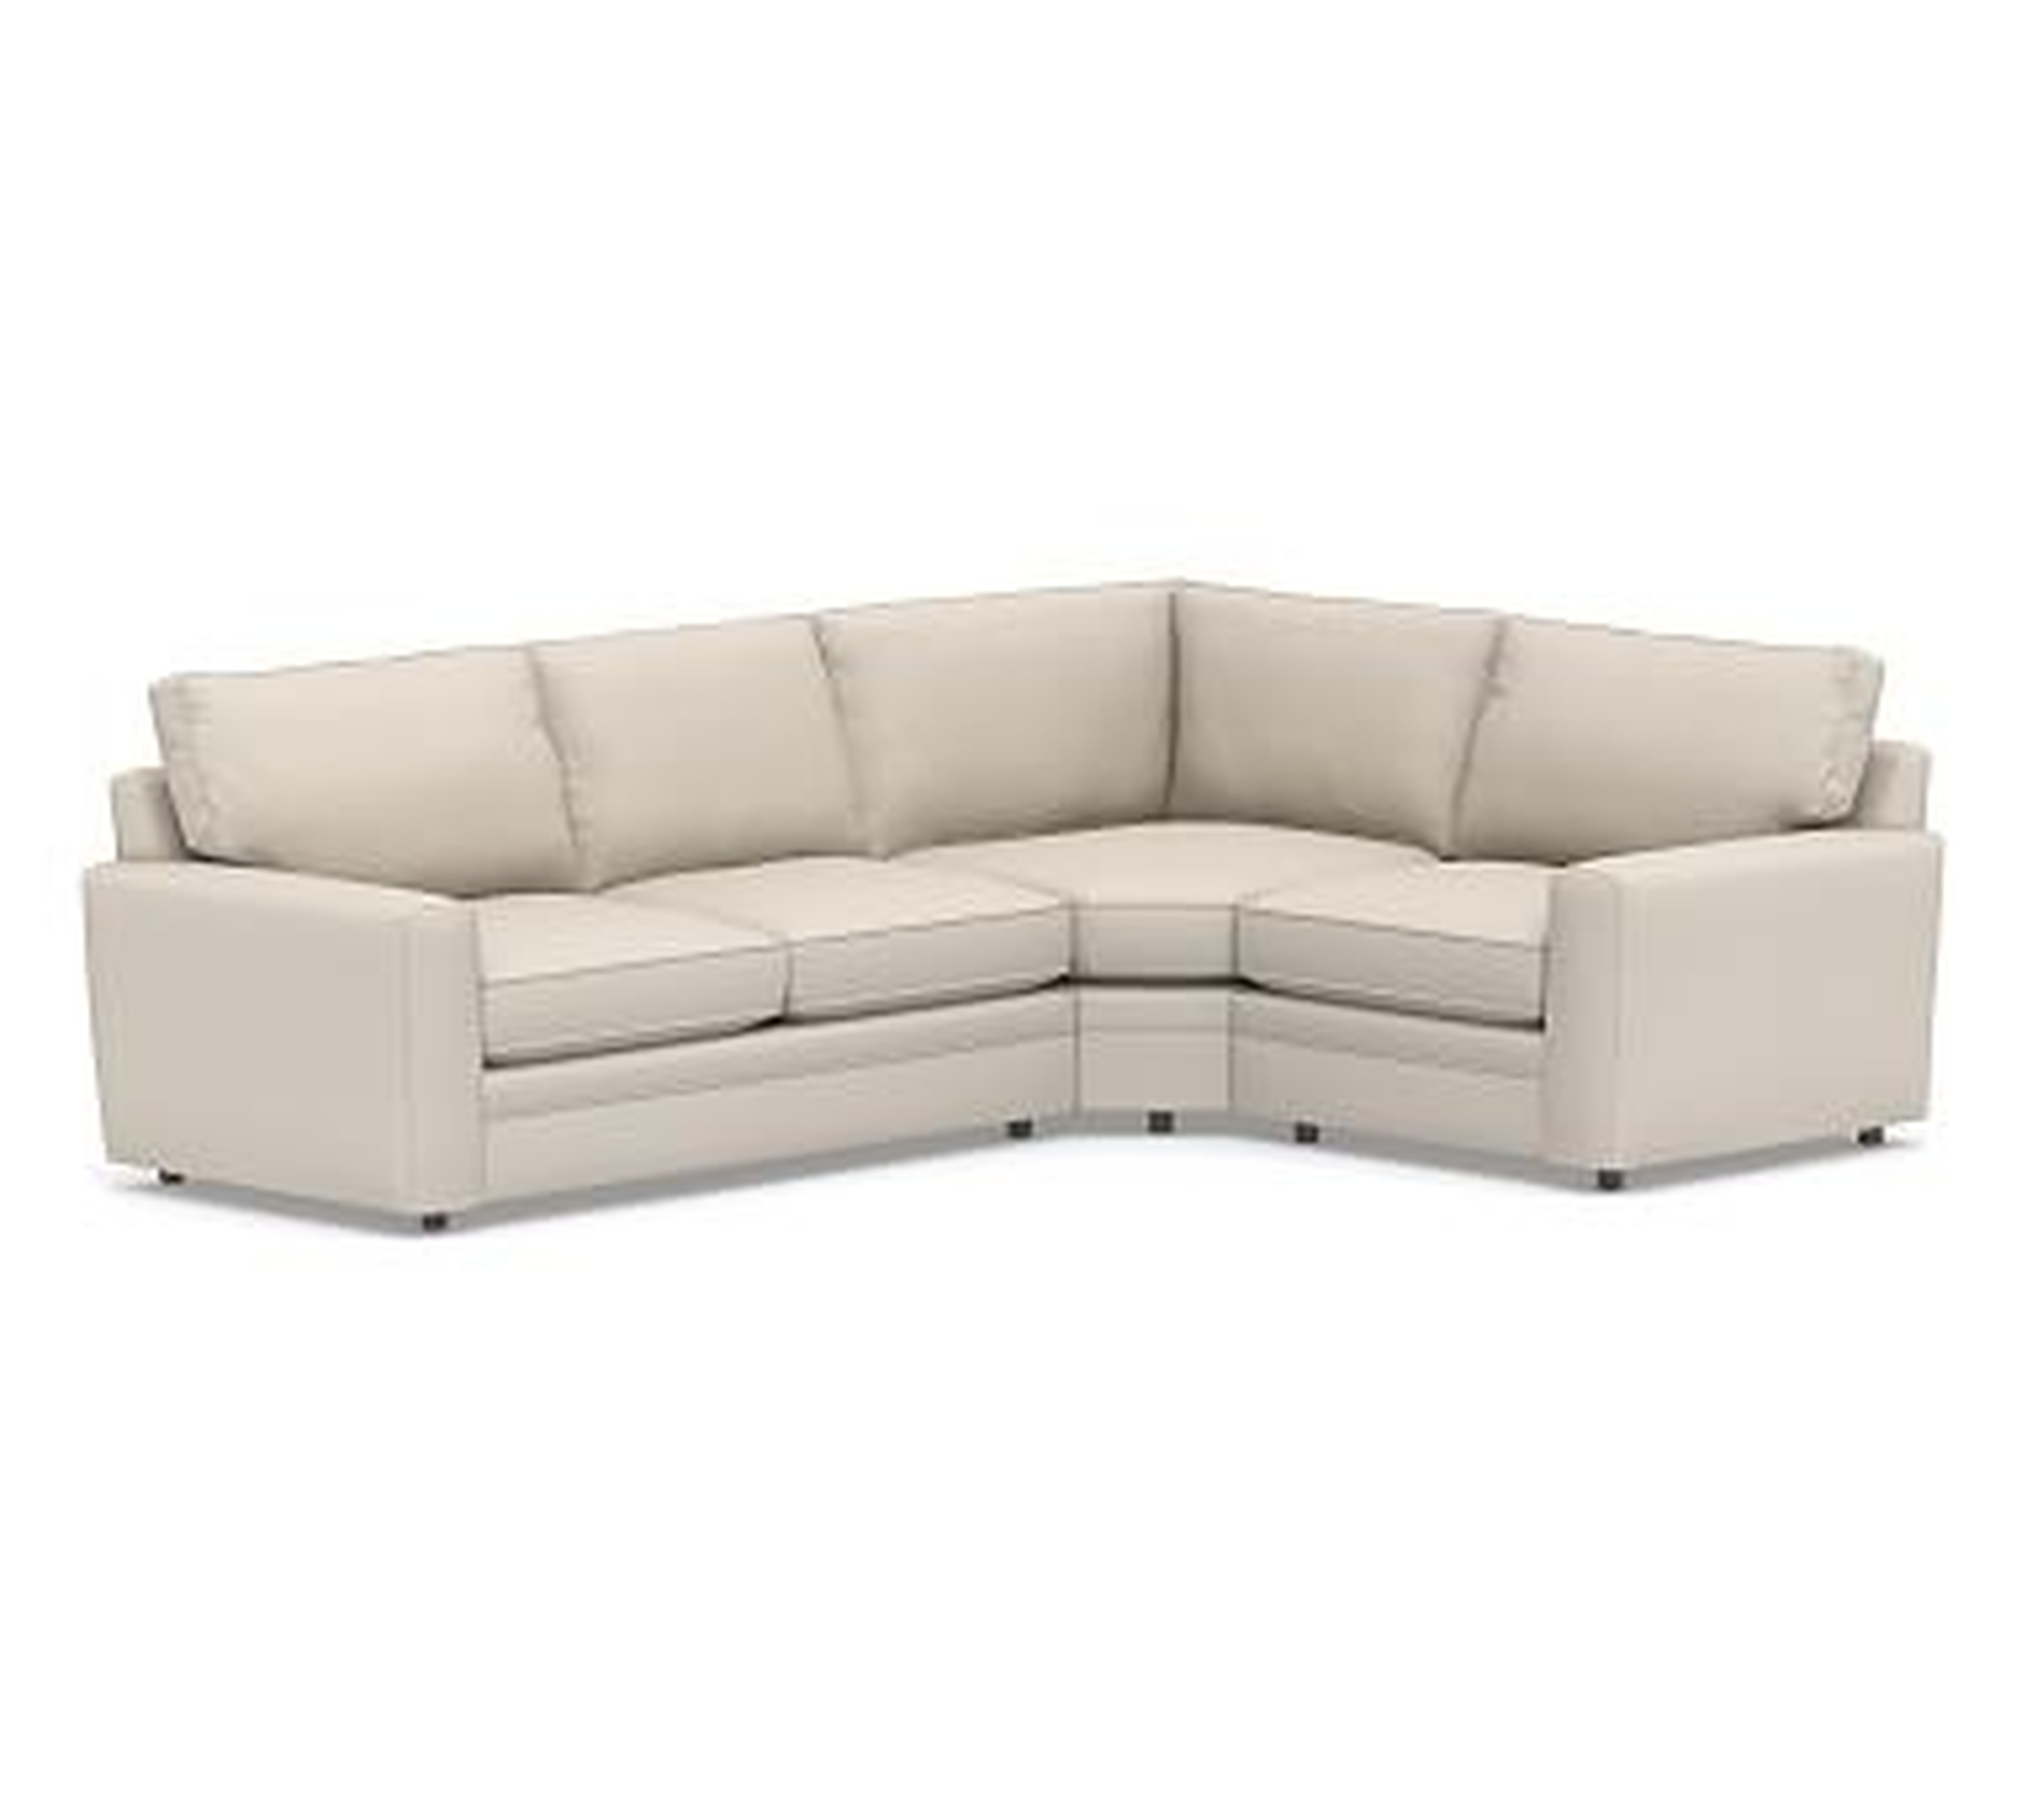 Pearce Square Arm Upholstered Left Arm 3-Piece Wedge Sectional, Down Blend Wrapped Cushions, Performance Brushed Basketweave Oatmeal - Pottery Barn